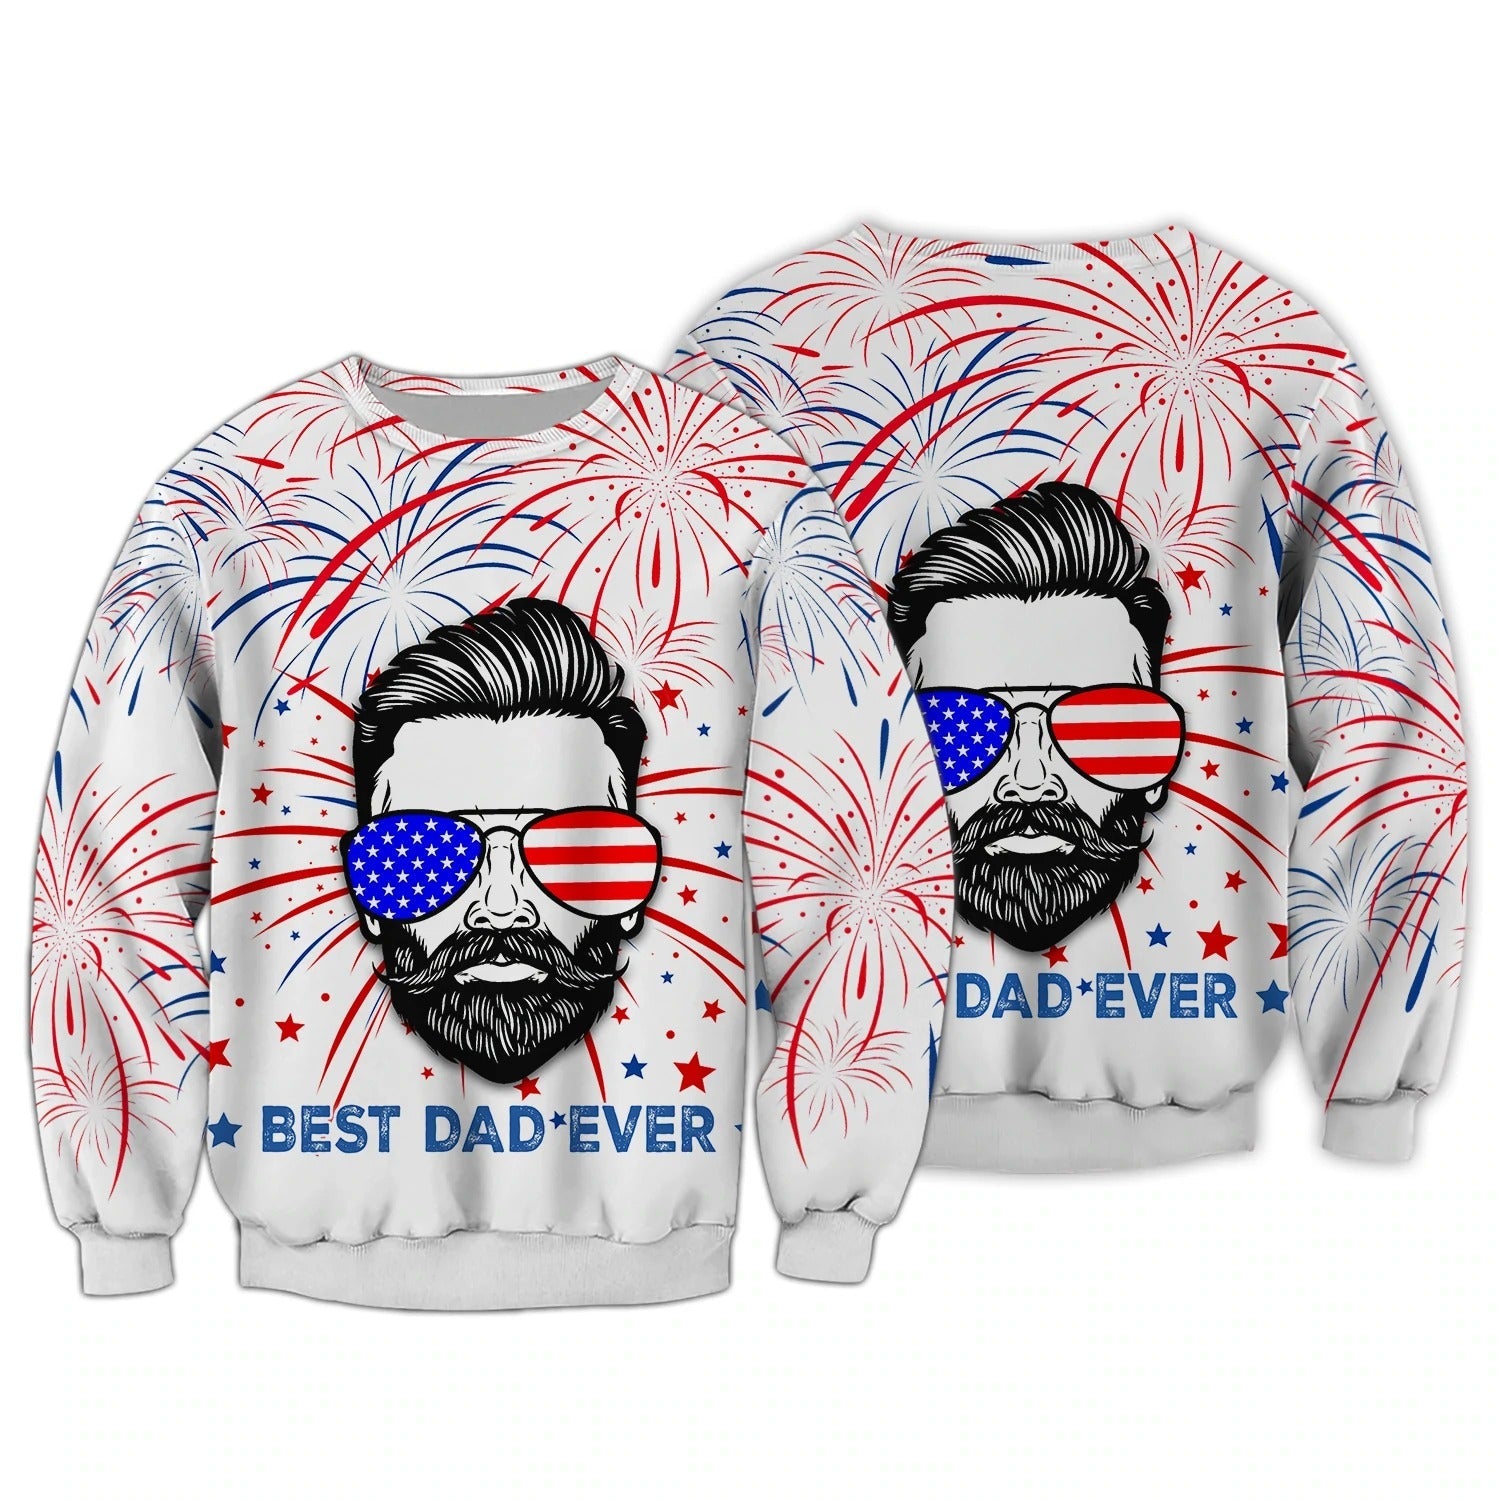 Independence Day Is Coming Best Dad Ever 3D Full Print Shirts Hoodie/ Best Dad Shirt 4Th July American Tee Shirt